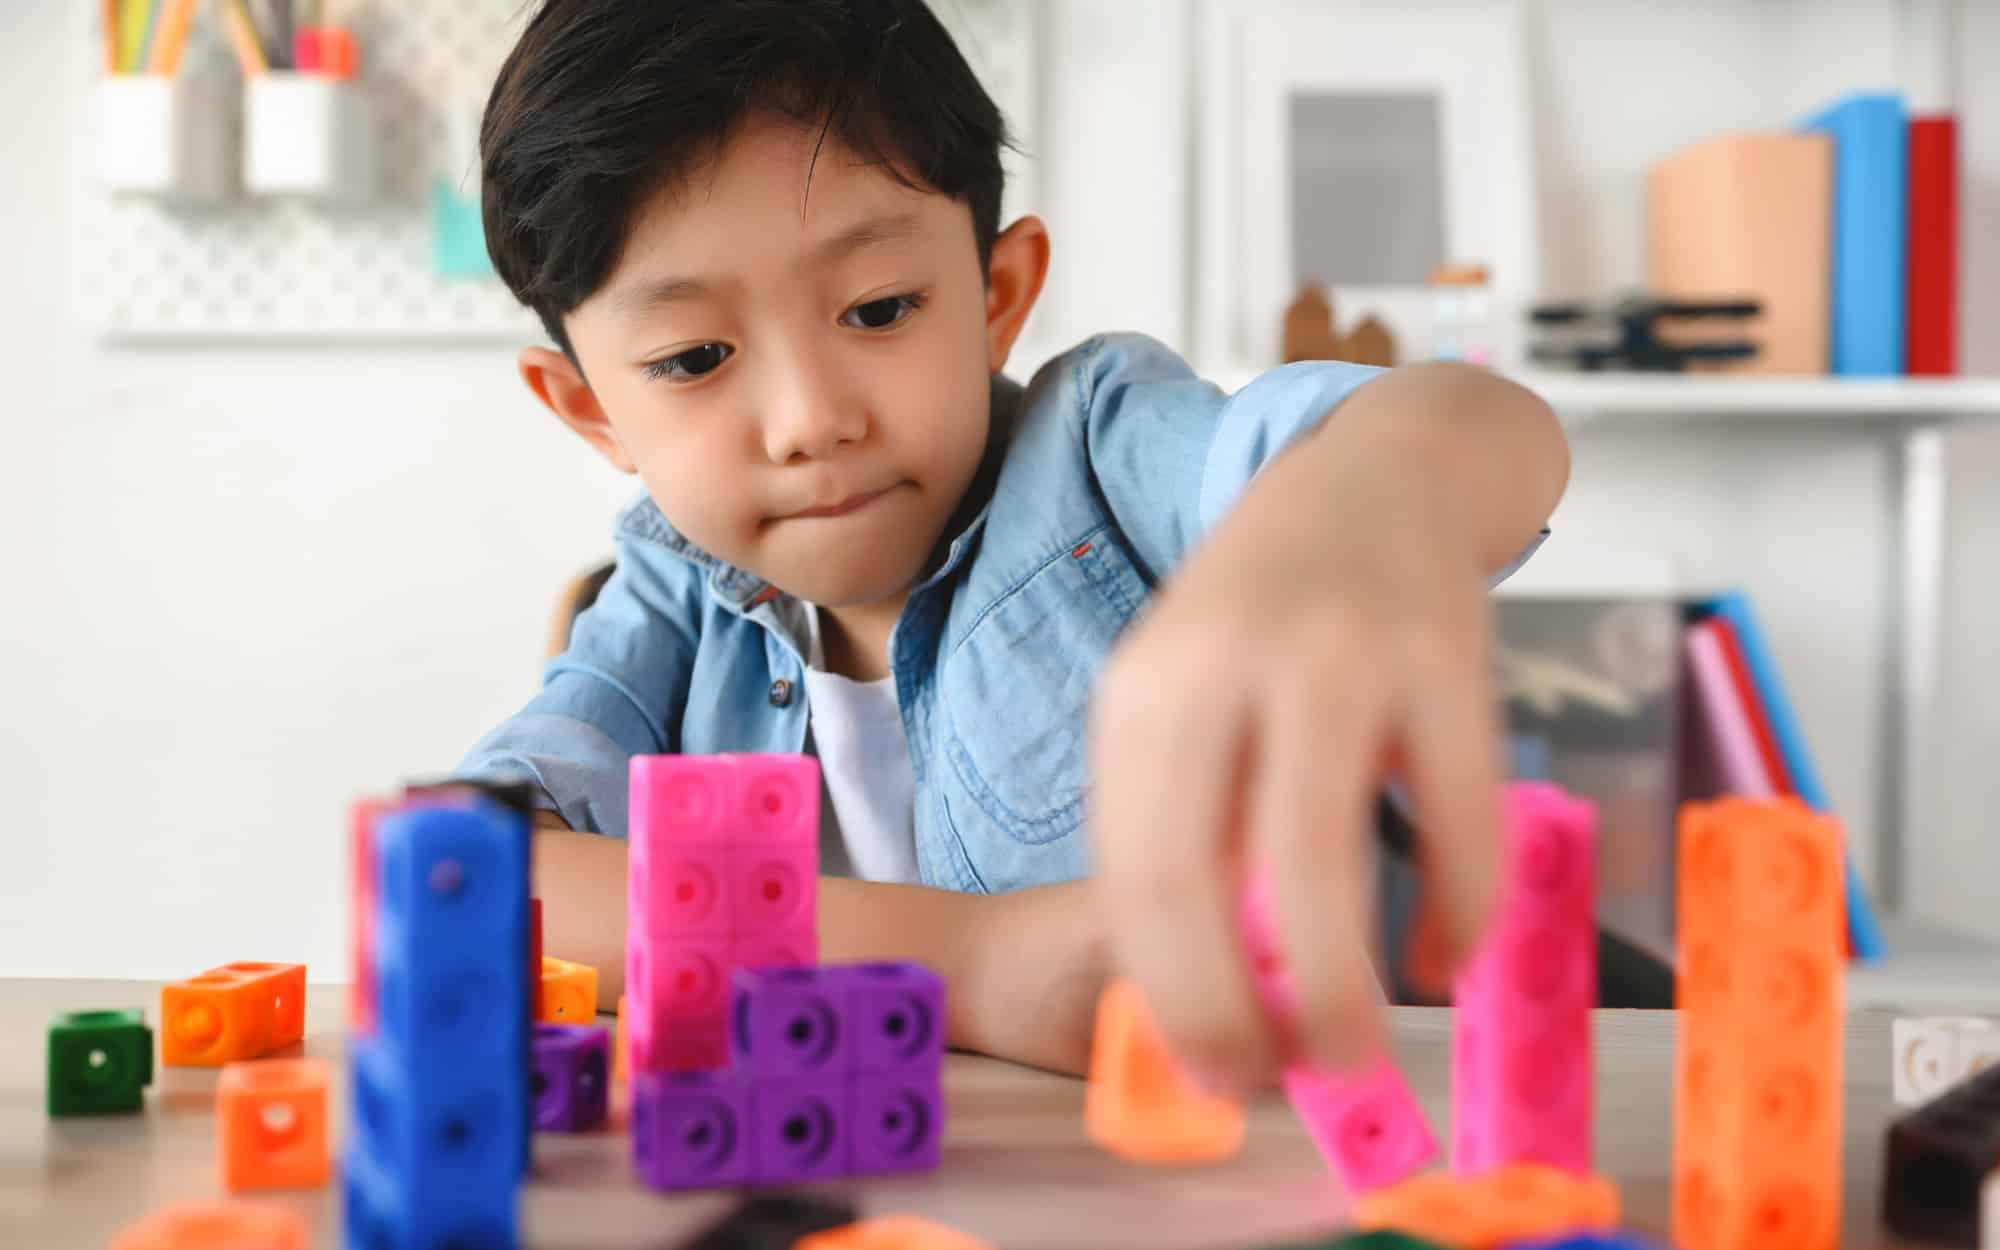 Child Playing Colorful Plastic Cubes on Desk at Home